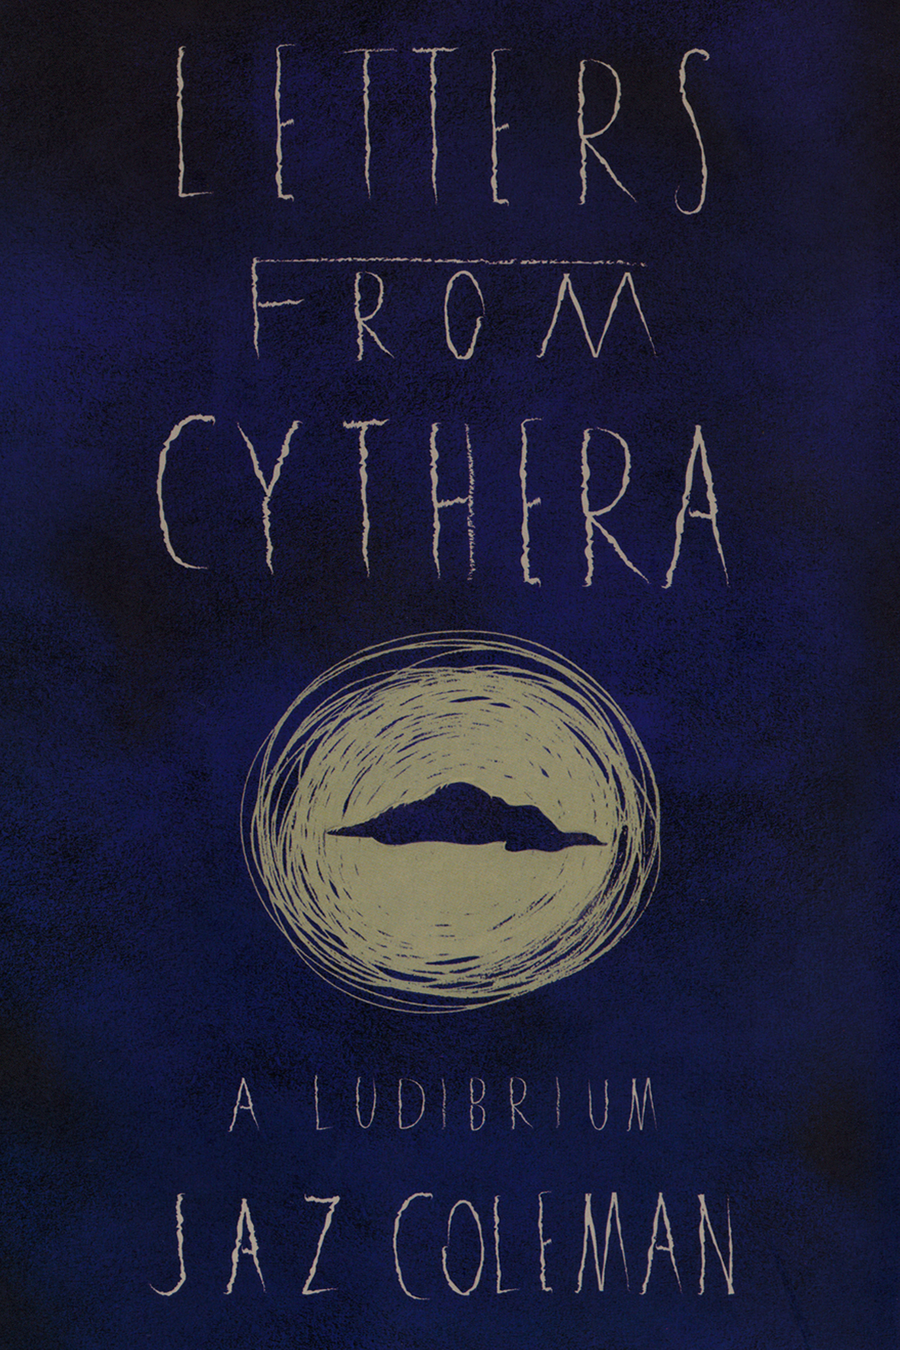 Jaz Coleman, Letters from Cythera.